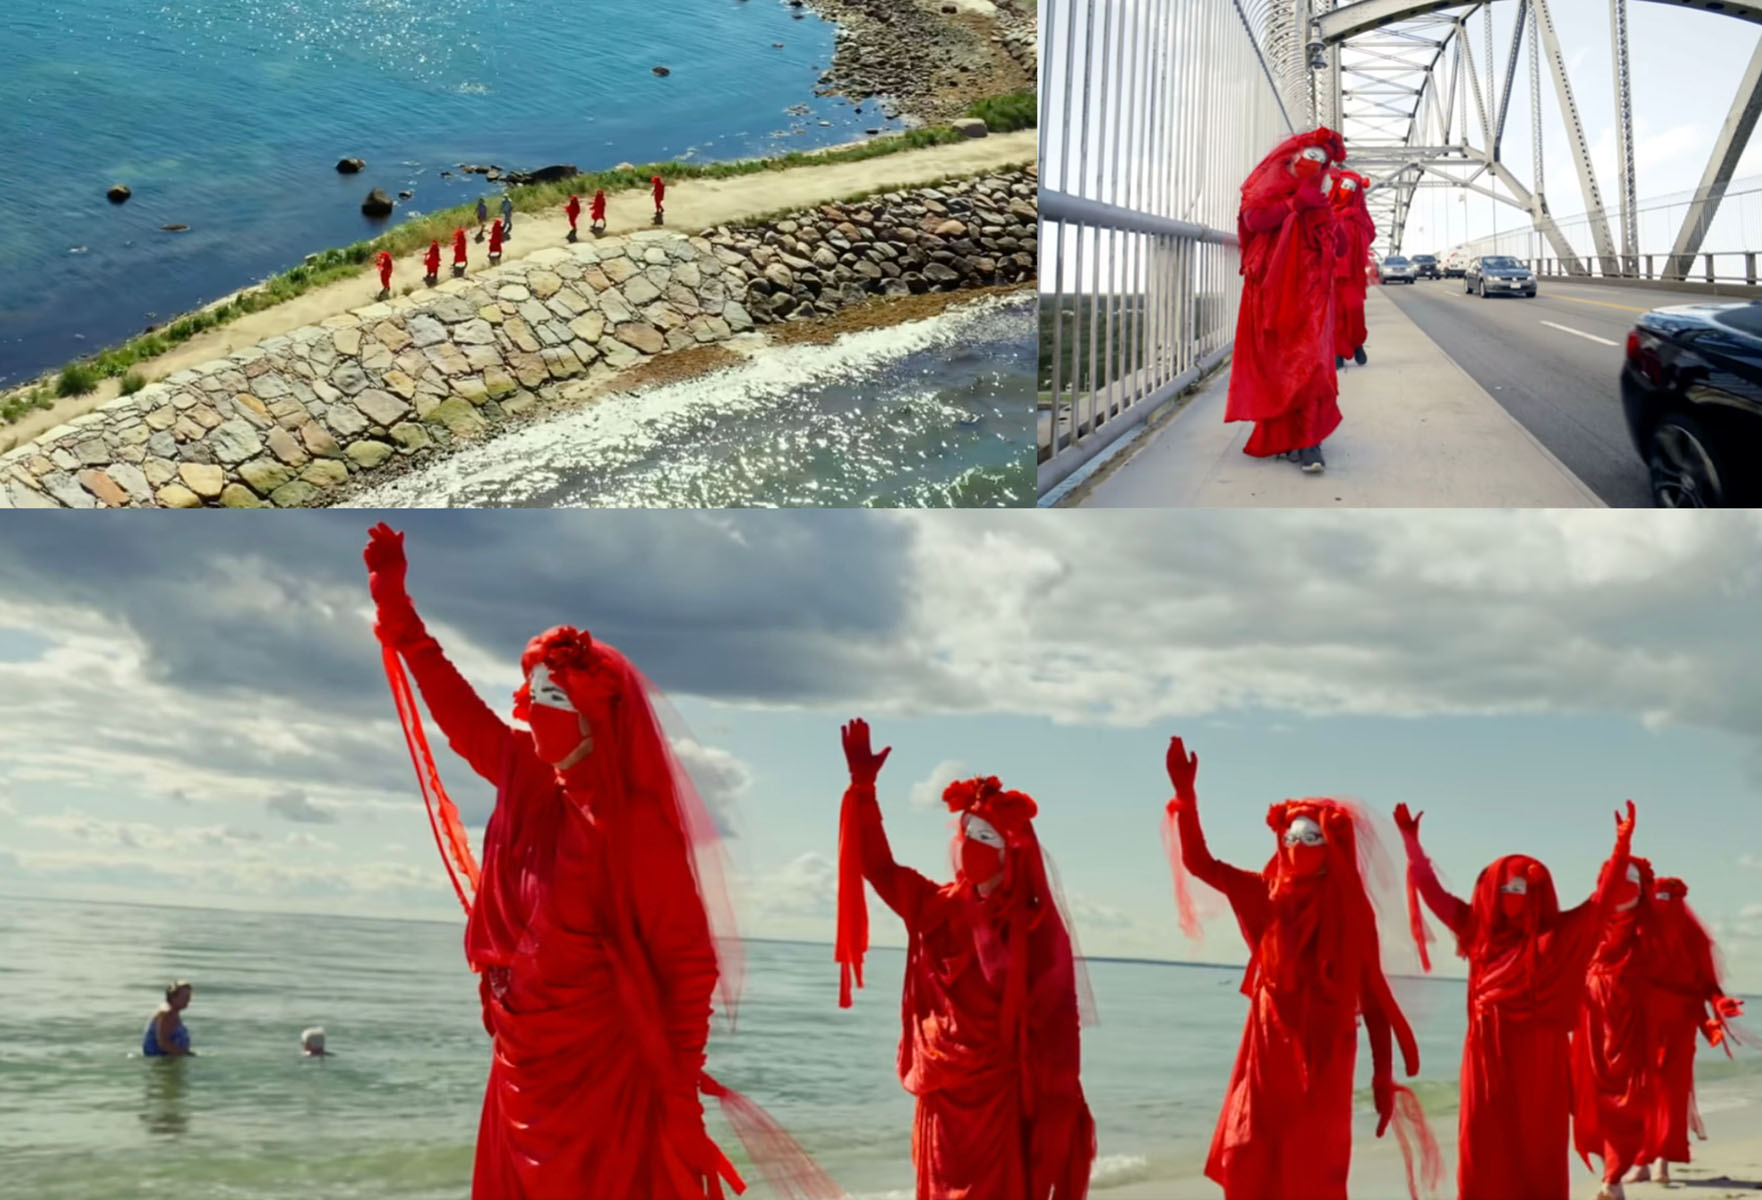 A trio of images showing the Red Rebels: filmed from above, on a bridge,and at a beach.